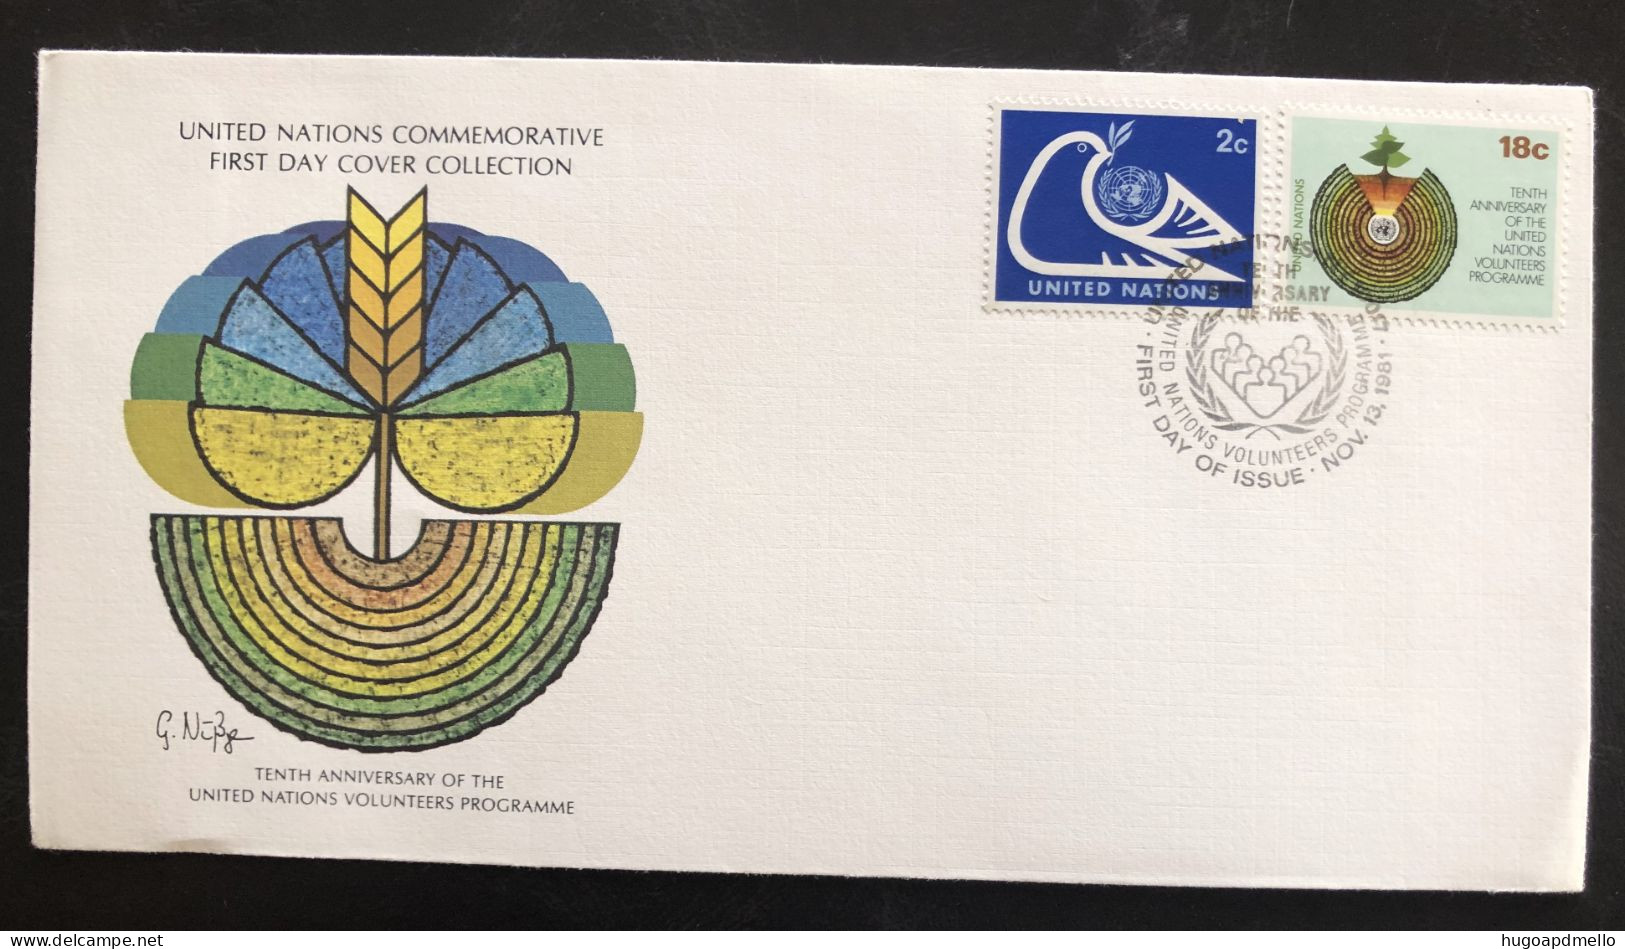 UNITED NATIONS, Uncirculated FDC « TENTH ANNIVERSARY OF THE UNITED NATIONS VOLUNTEERS PROGRAMME », 1981 - UNO